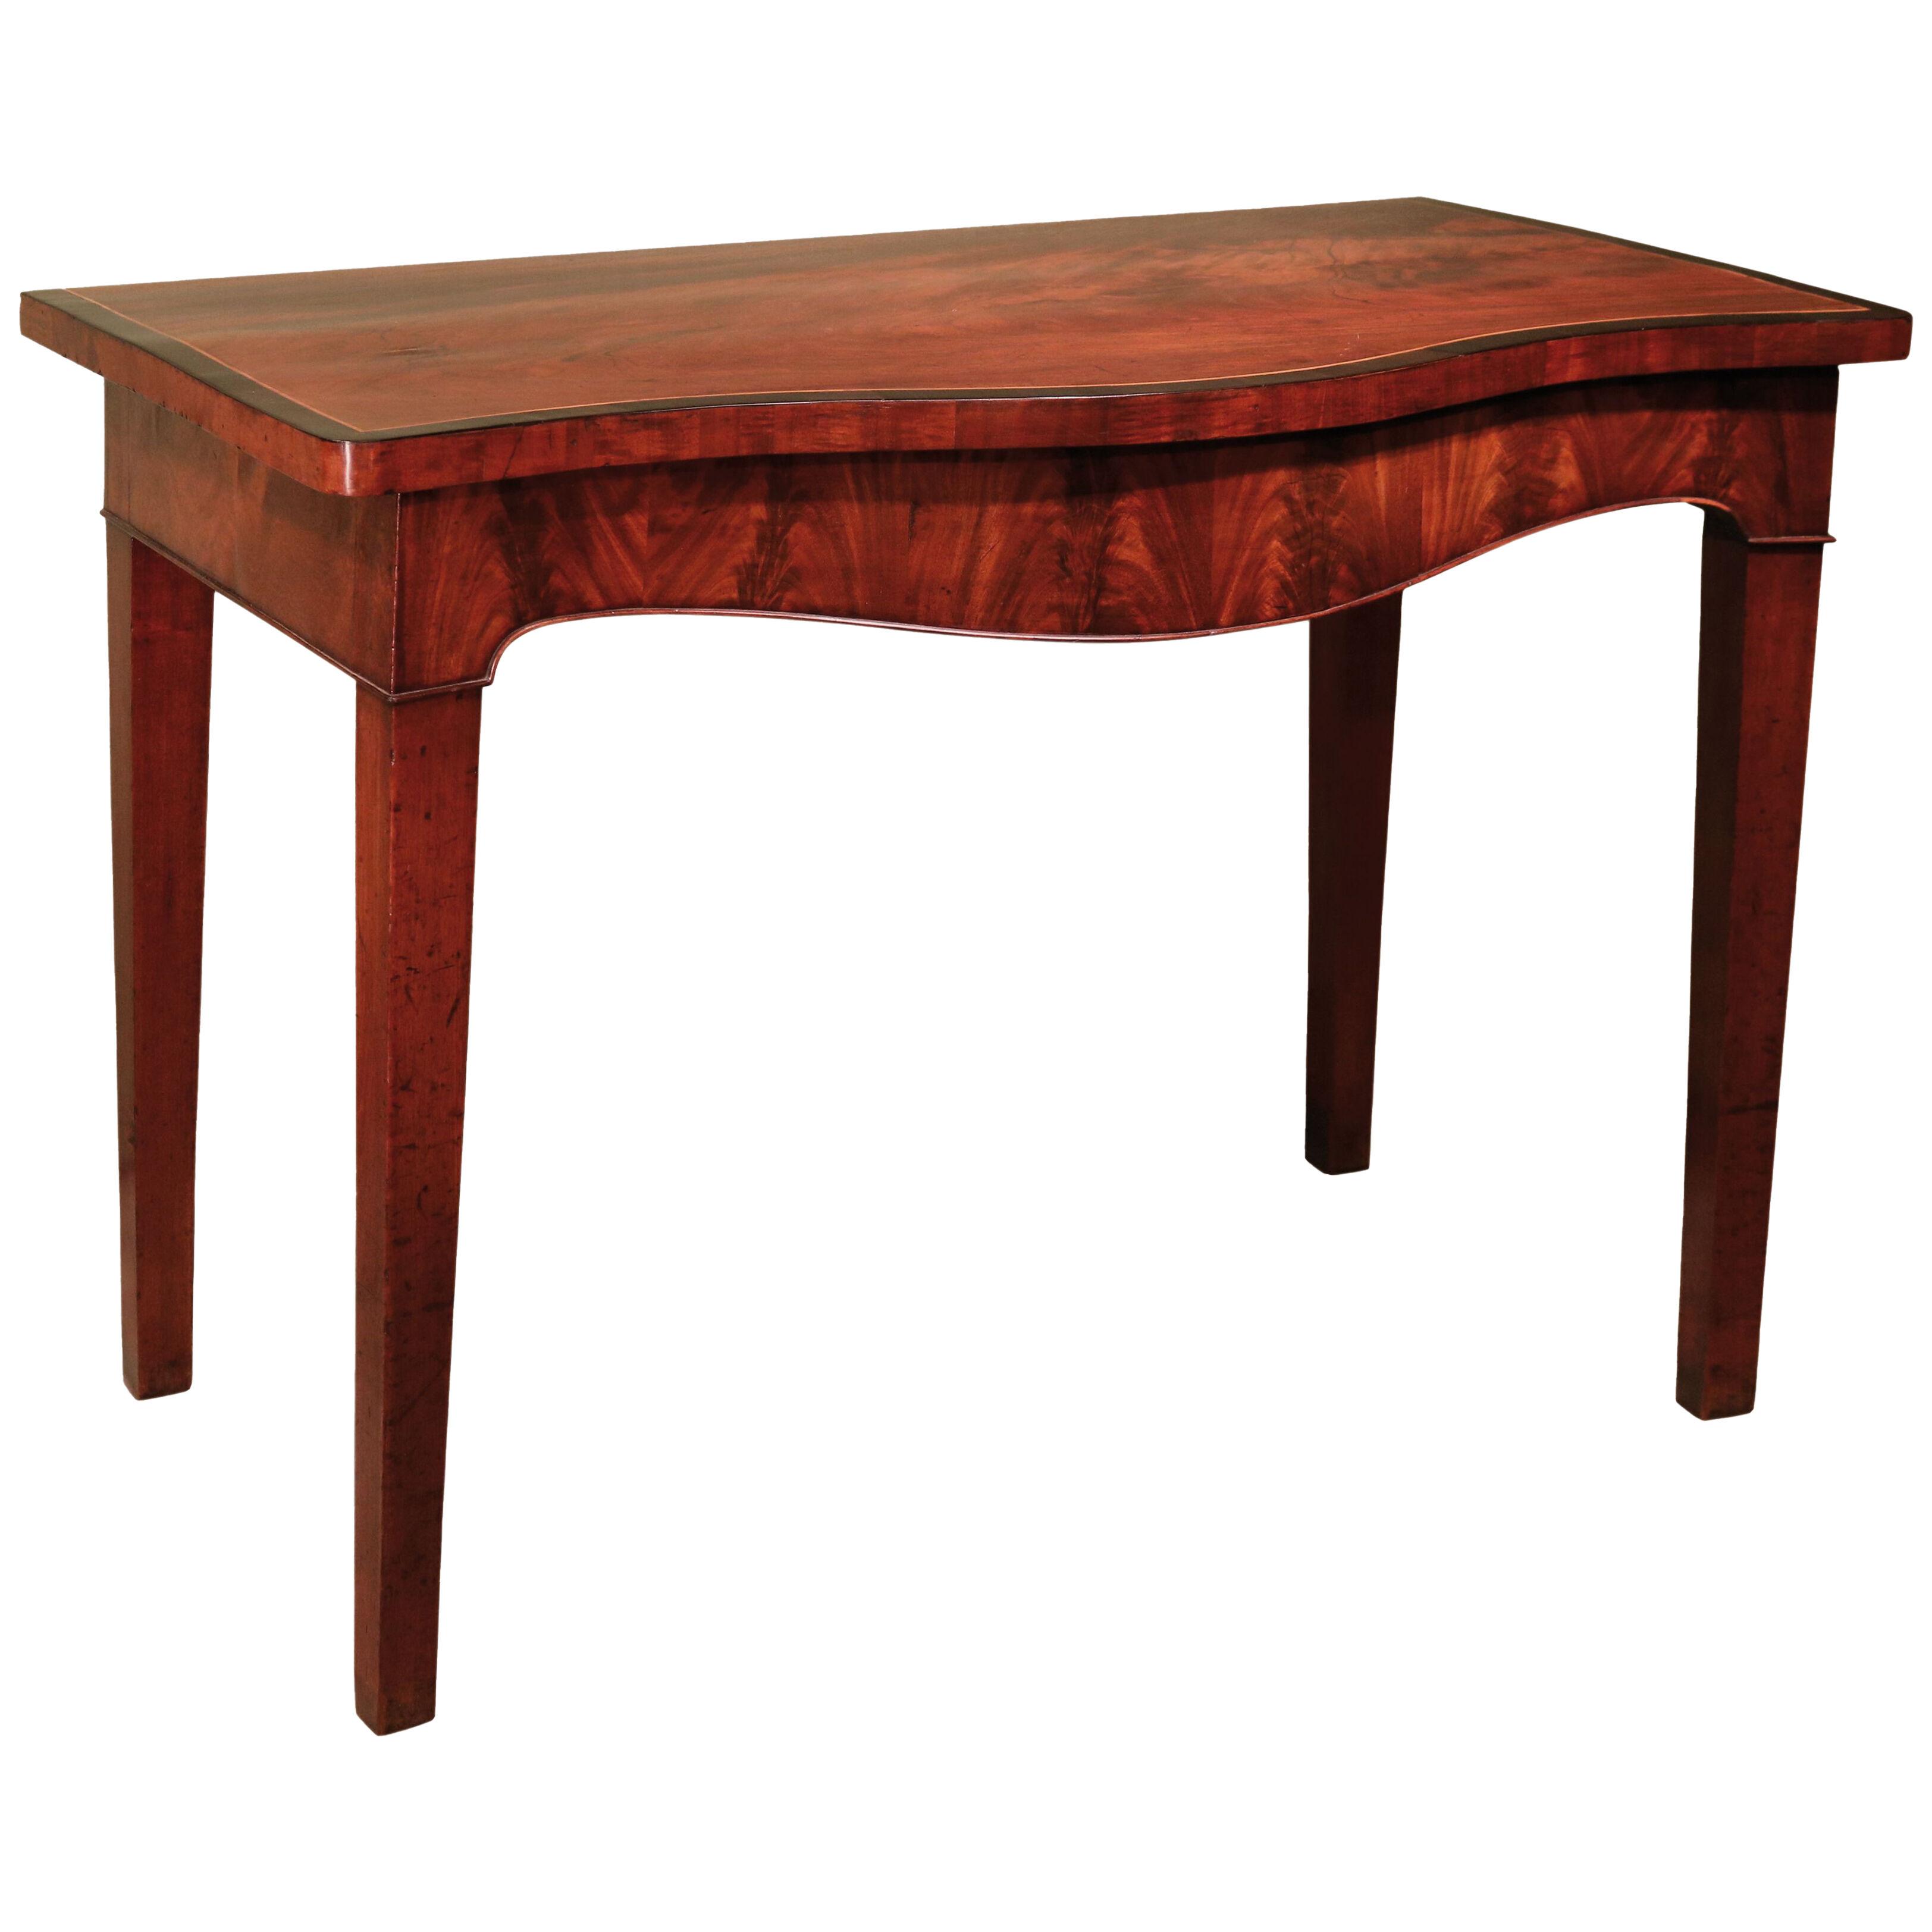 A mid 18th Century Mahogany Serpentine Side Table